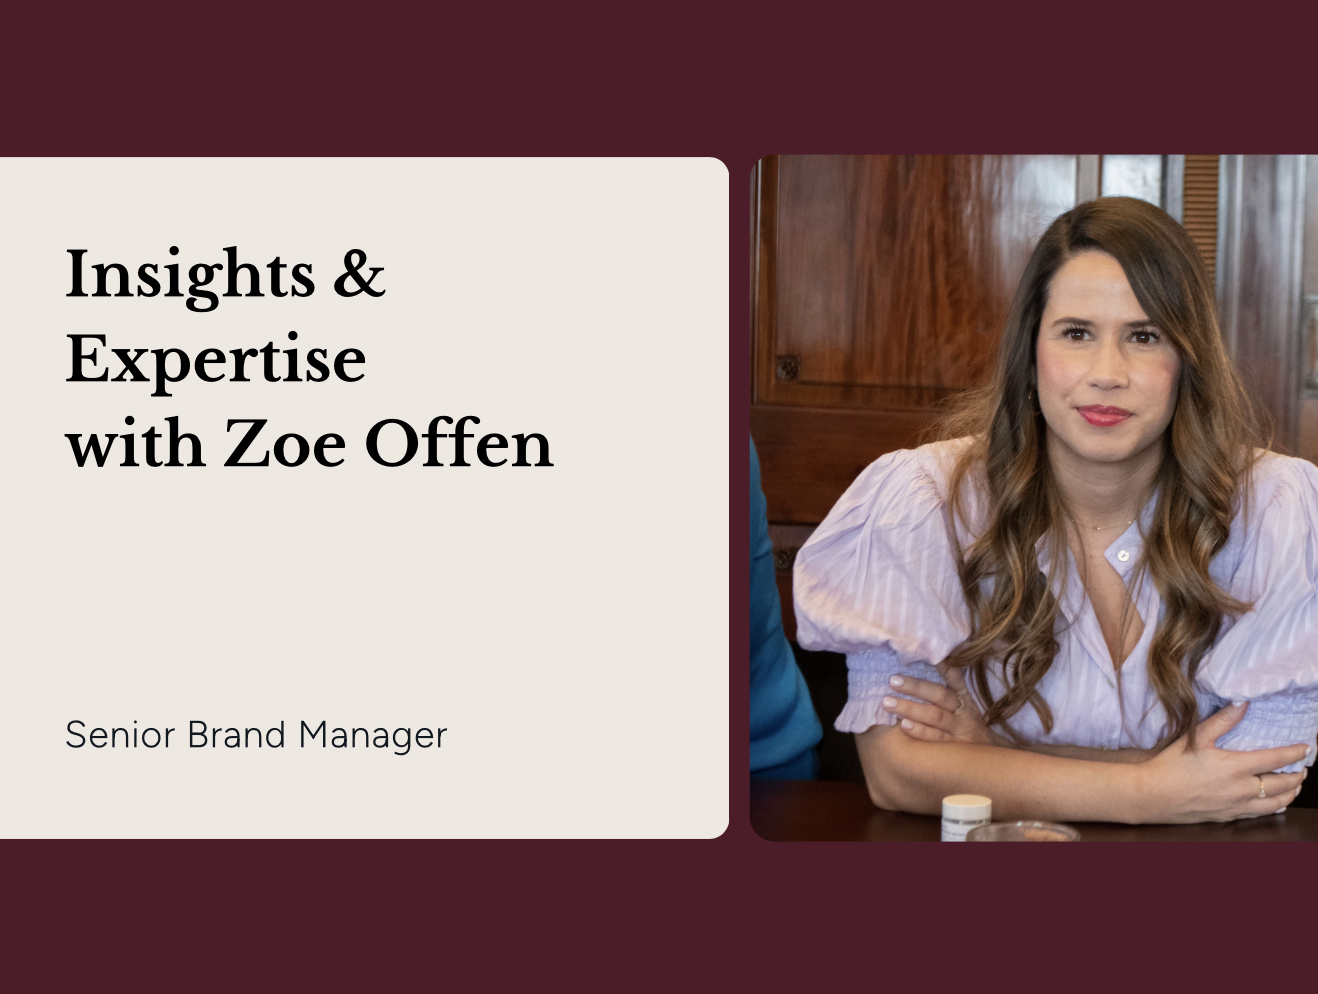 Insights & Expertise with Zoe Offen, Senior Brand Manager